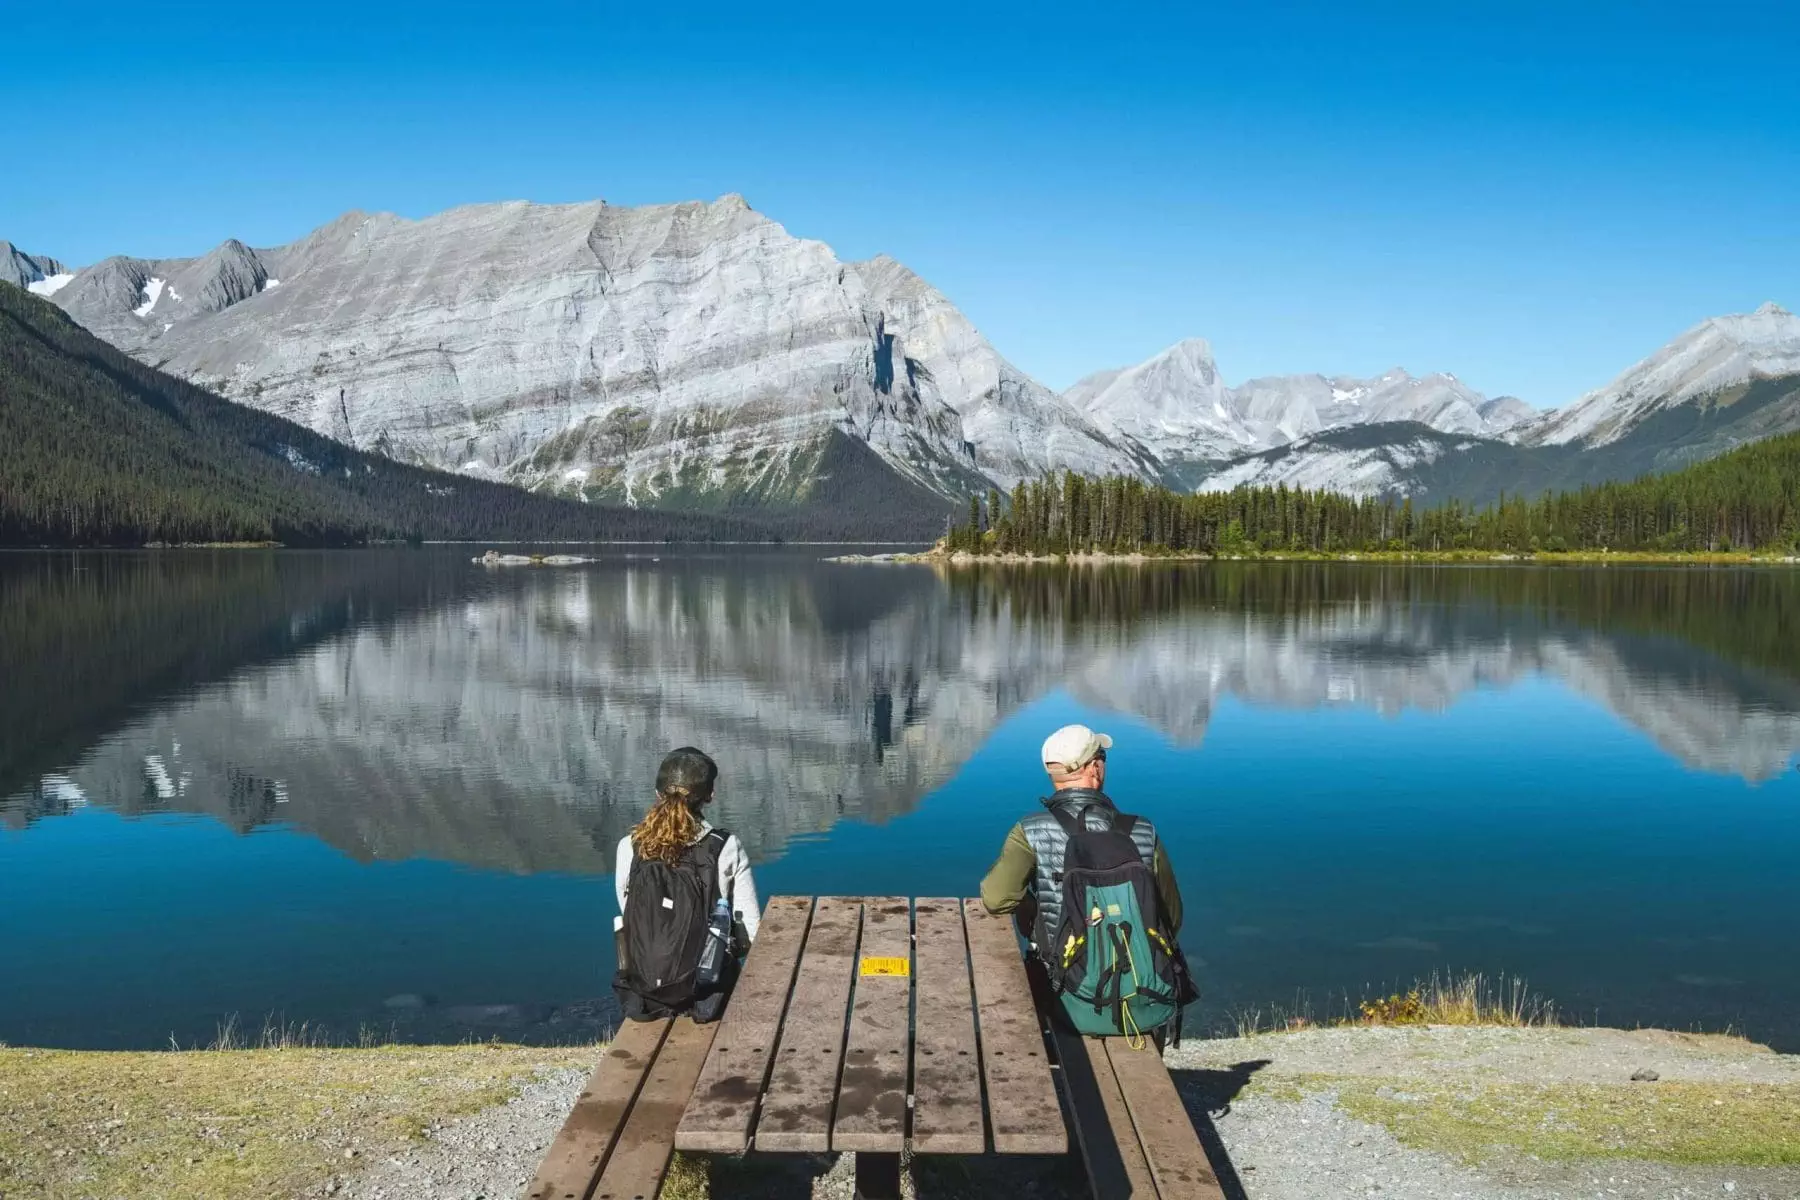 Kananaskis Park - 7 Best Features You Need To Know! 10